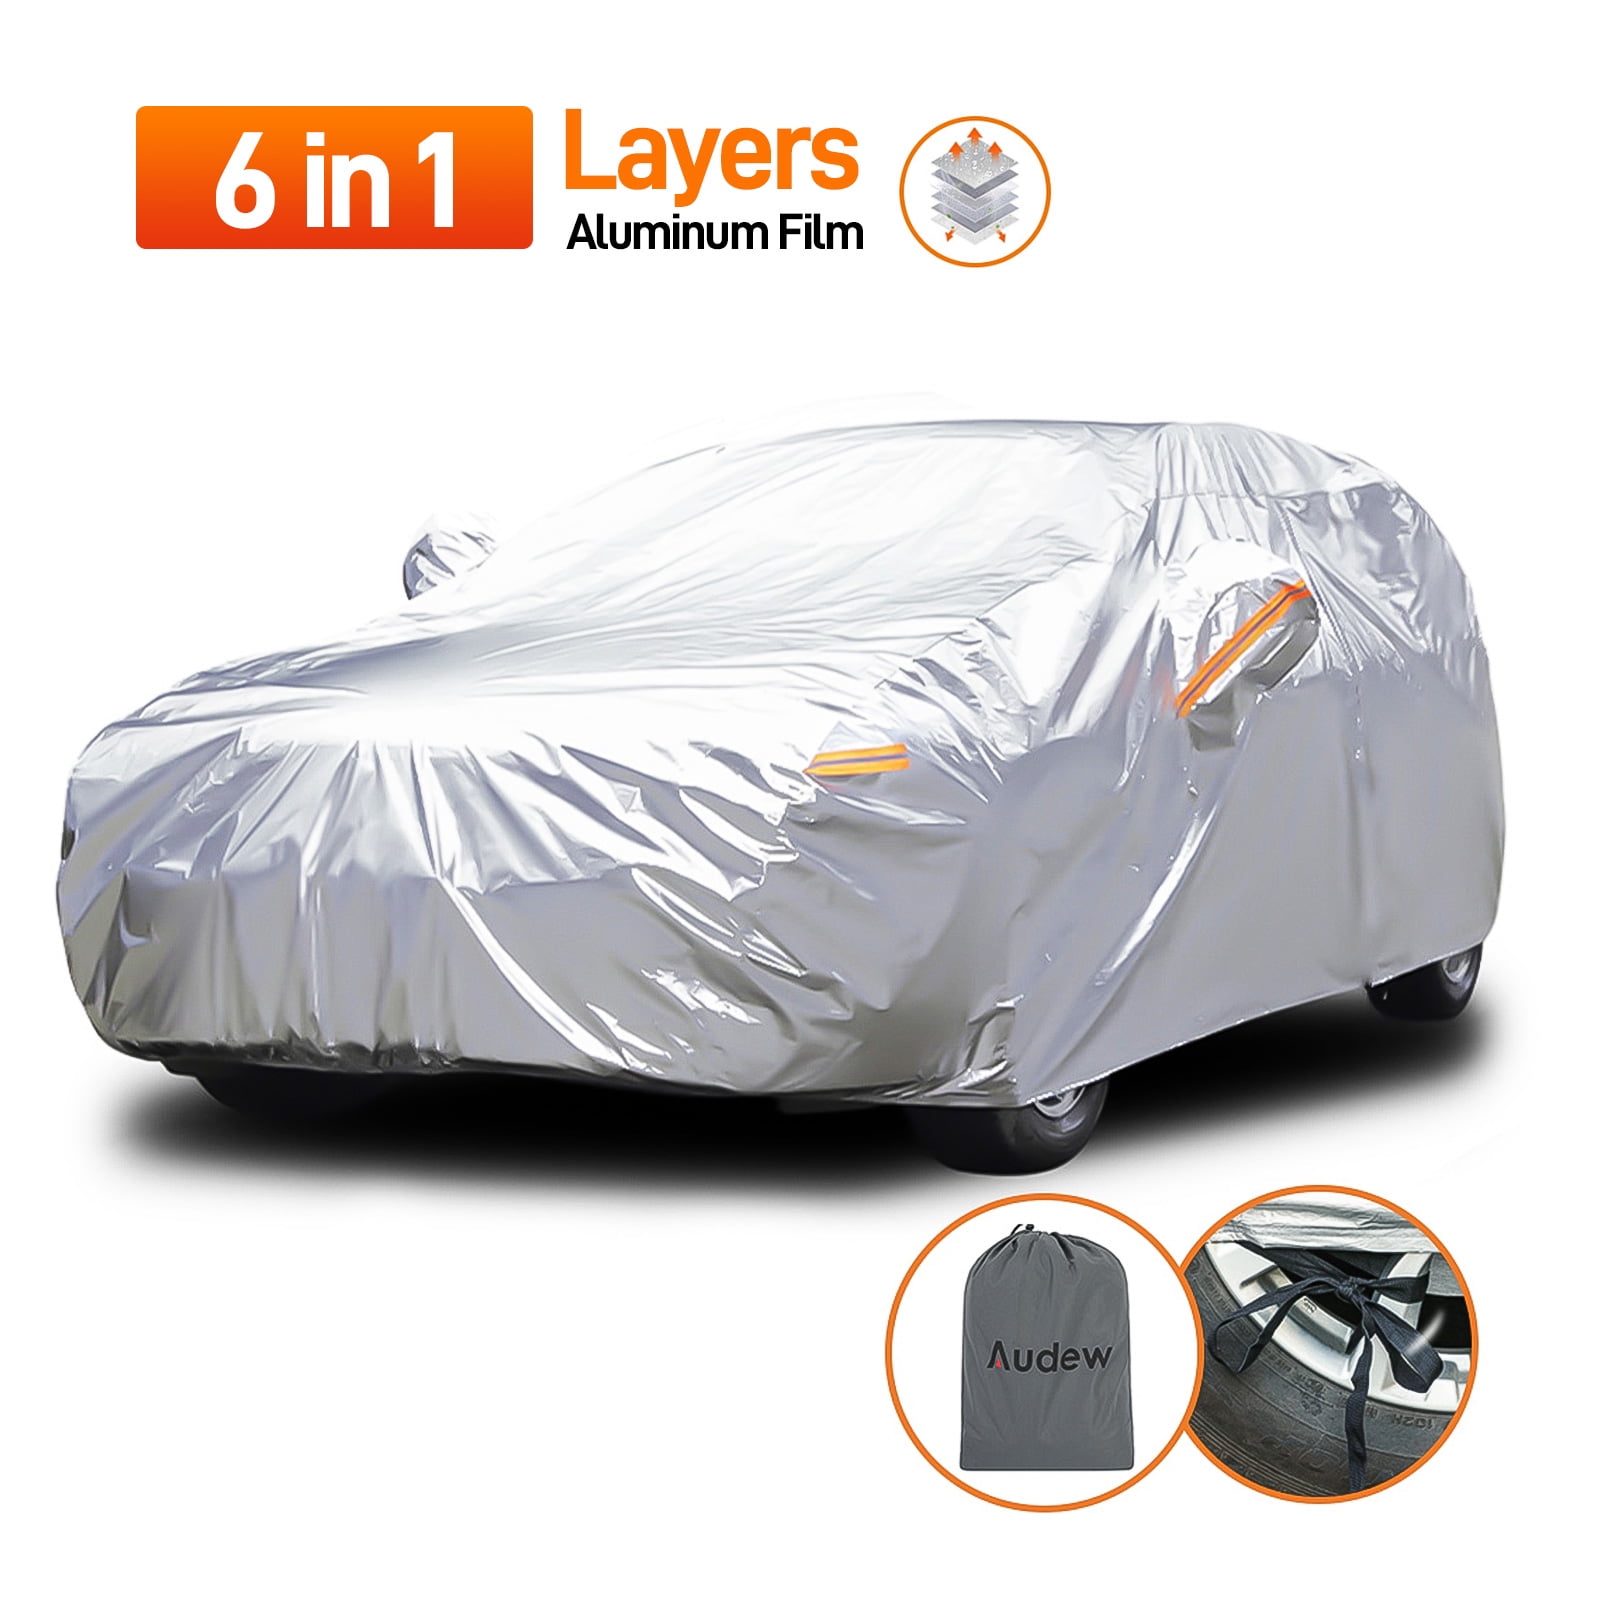 AUTOSAVER88 Car Cover Waterproof All Weather for Automobiles,Windproof Snowproof UV Protection Outdoor Full Exterior Cover Universal Fit for Sedan Length Up to 200 inches 